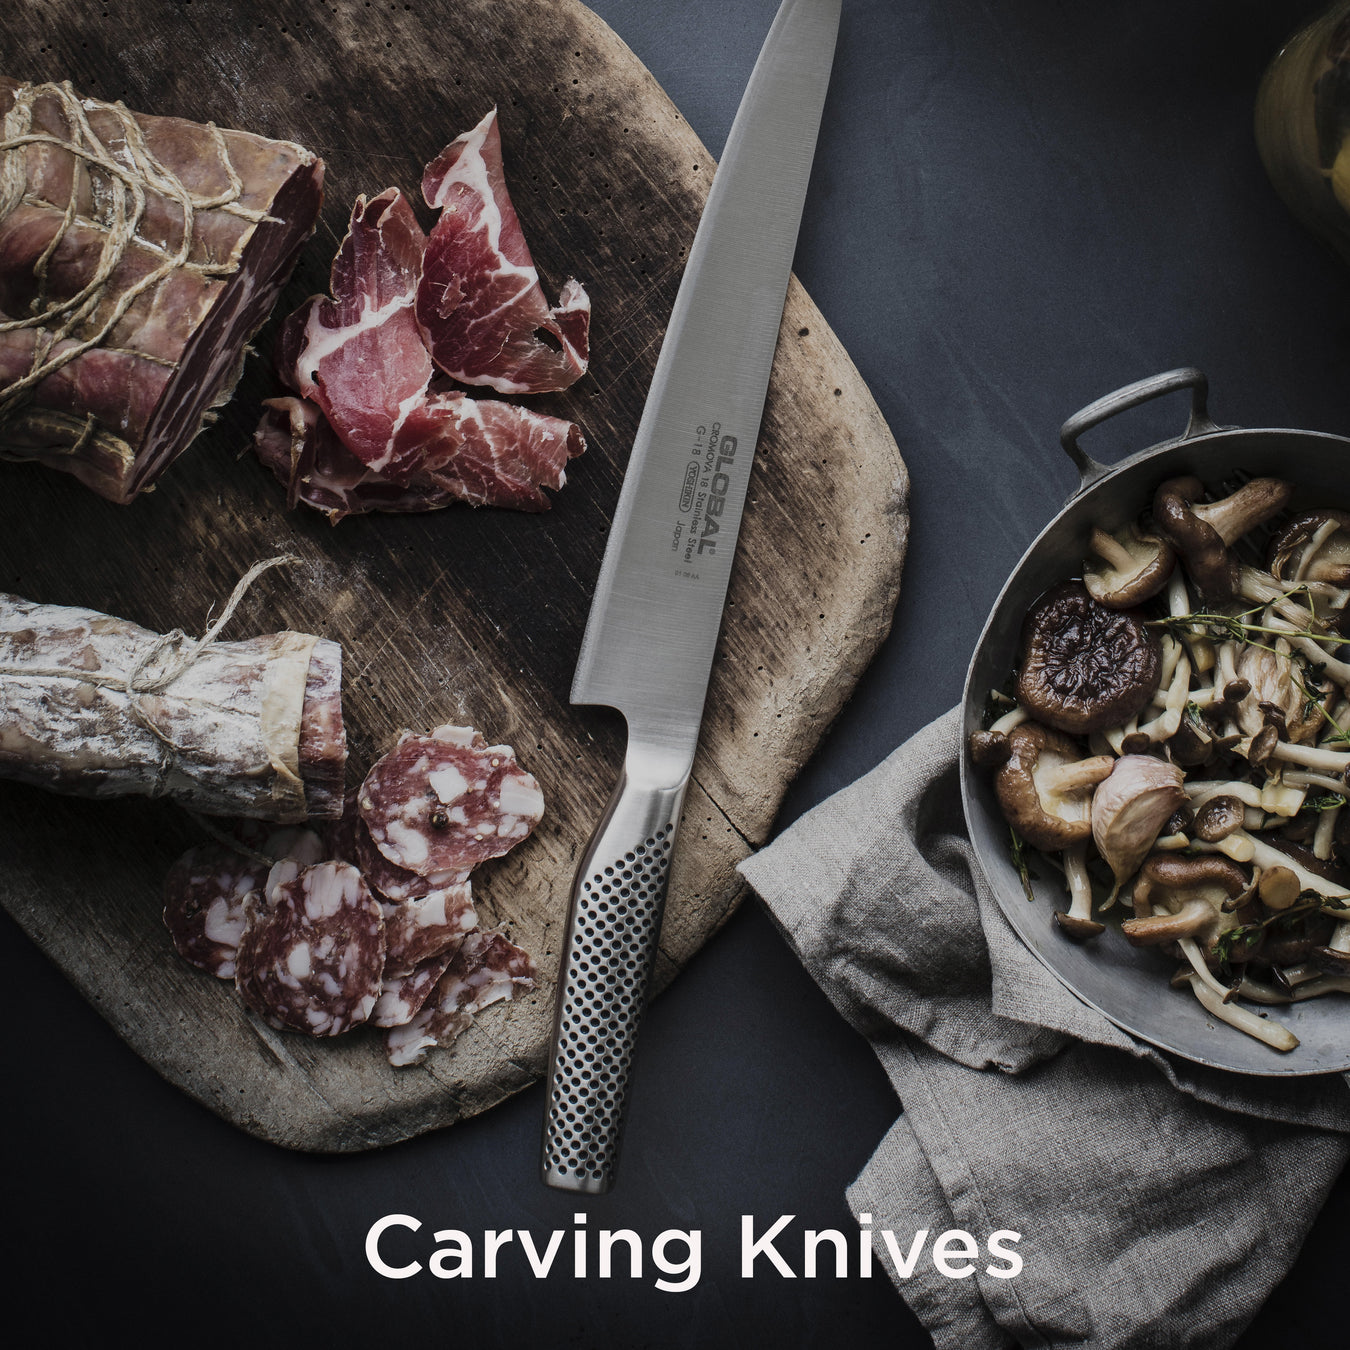 Global Carving Knives